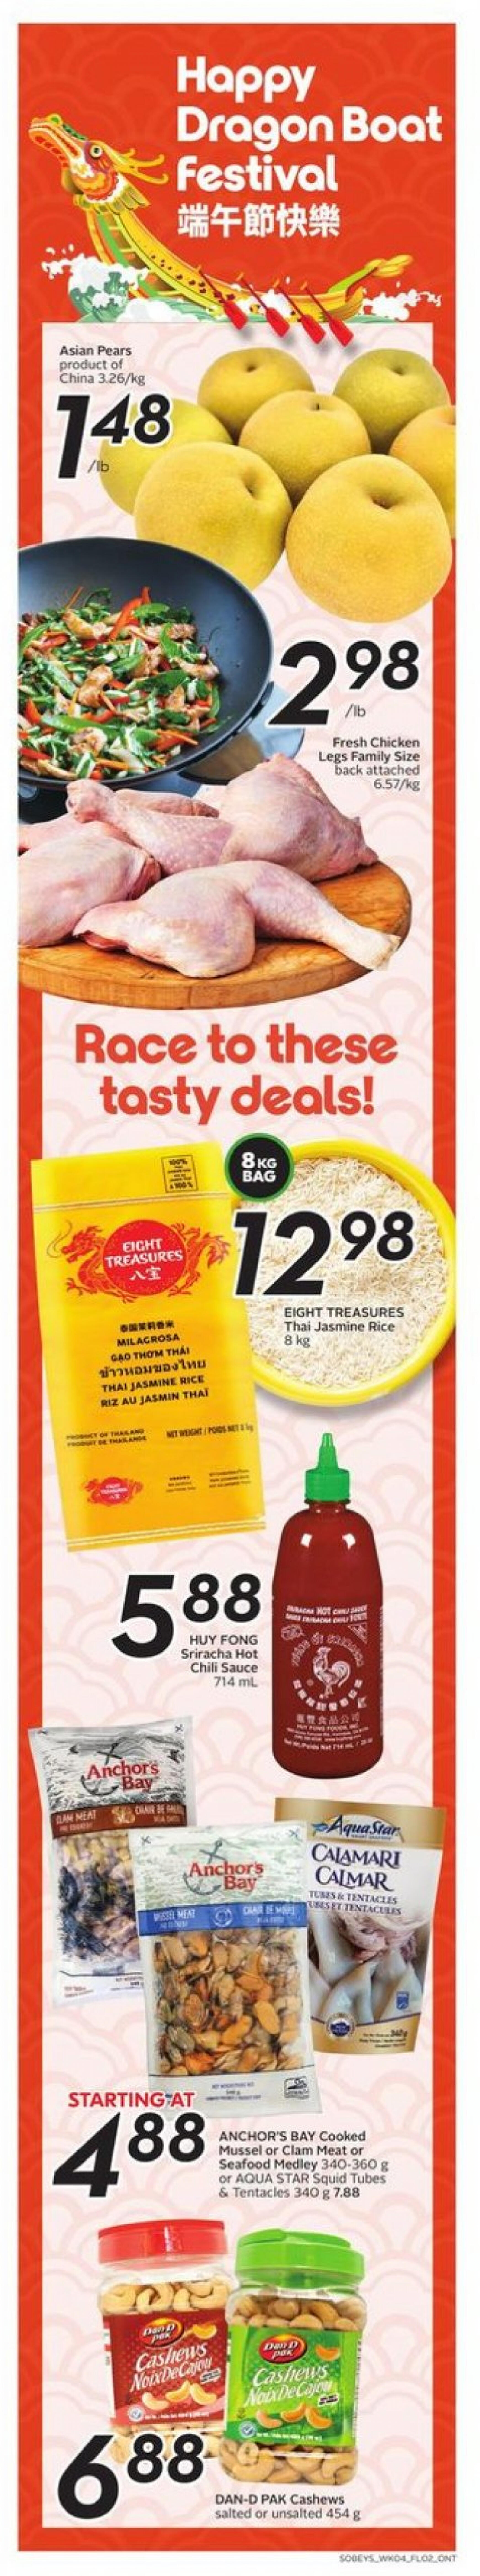 sobeys - Sobeys - Weekly Flyer - Ontario flyer current 23.05. - 29.05. - page: 3